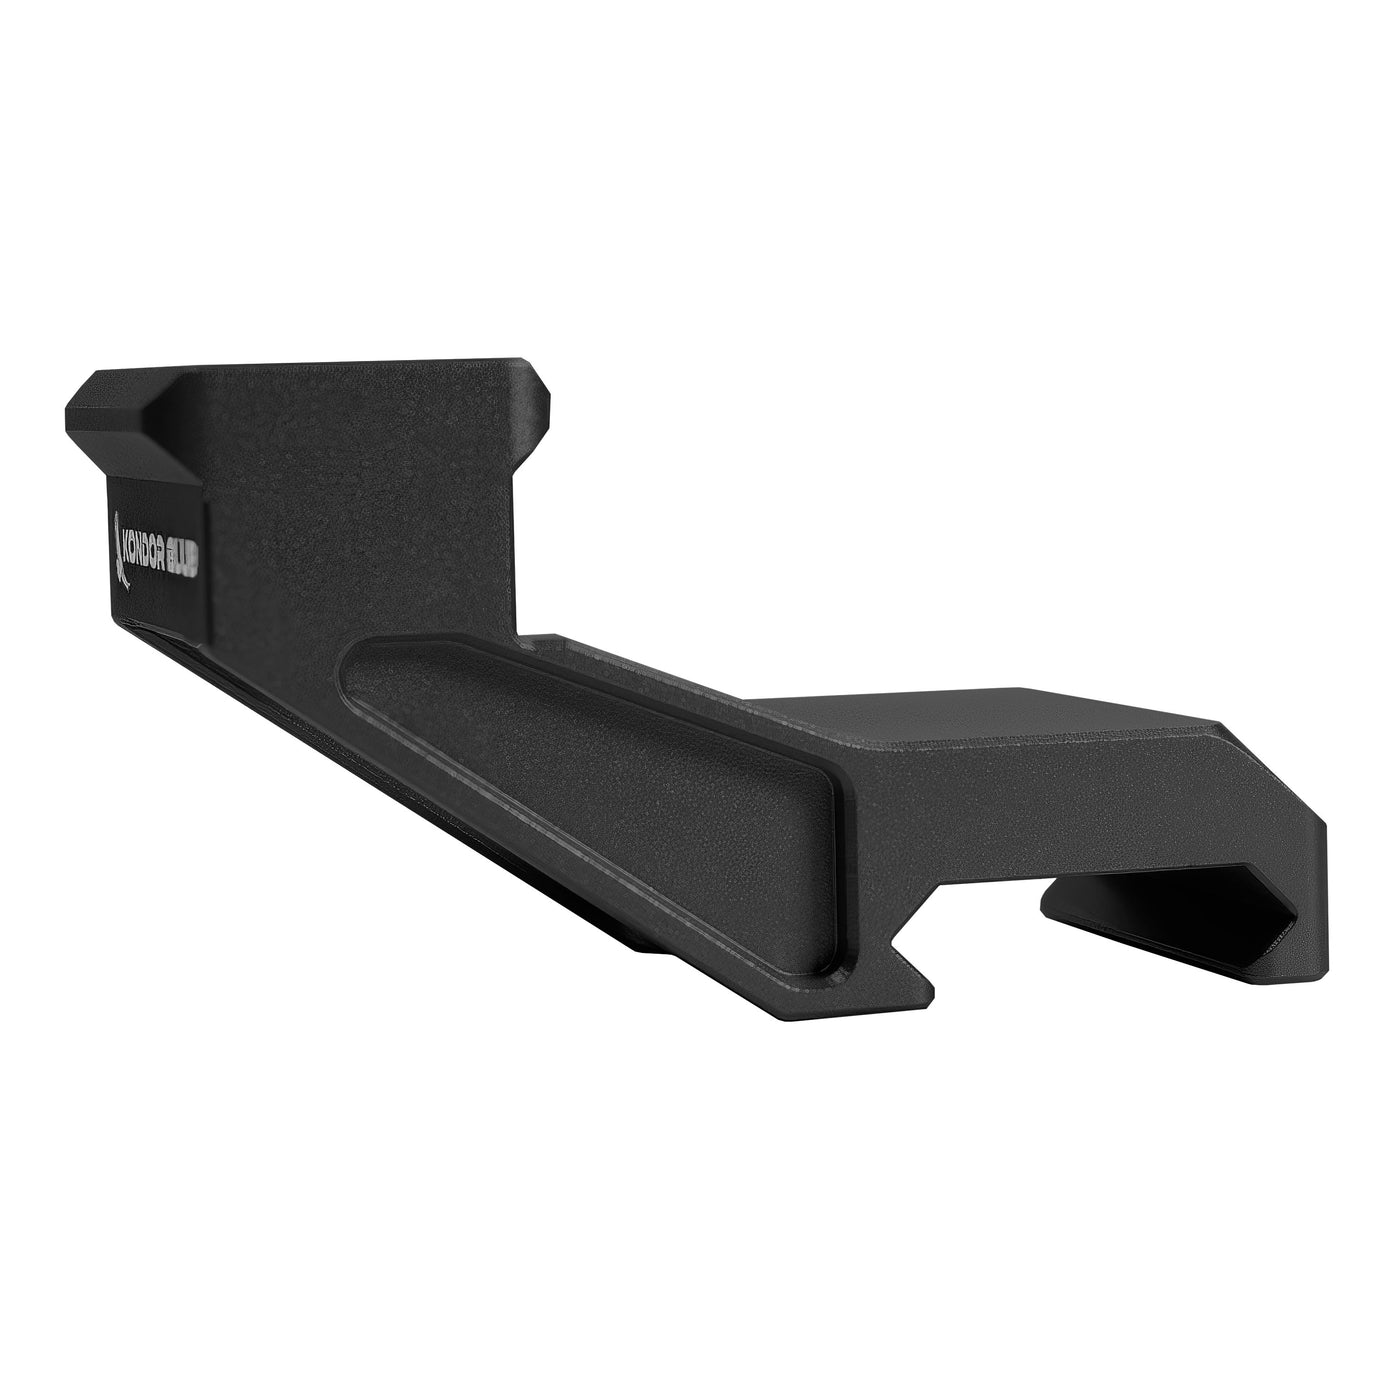 NATO Riser Height Extension for Top Handles